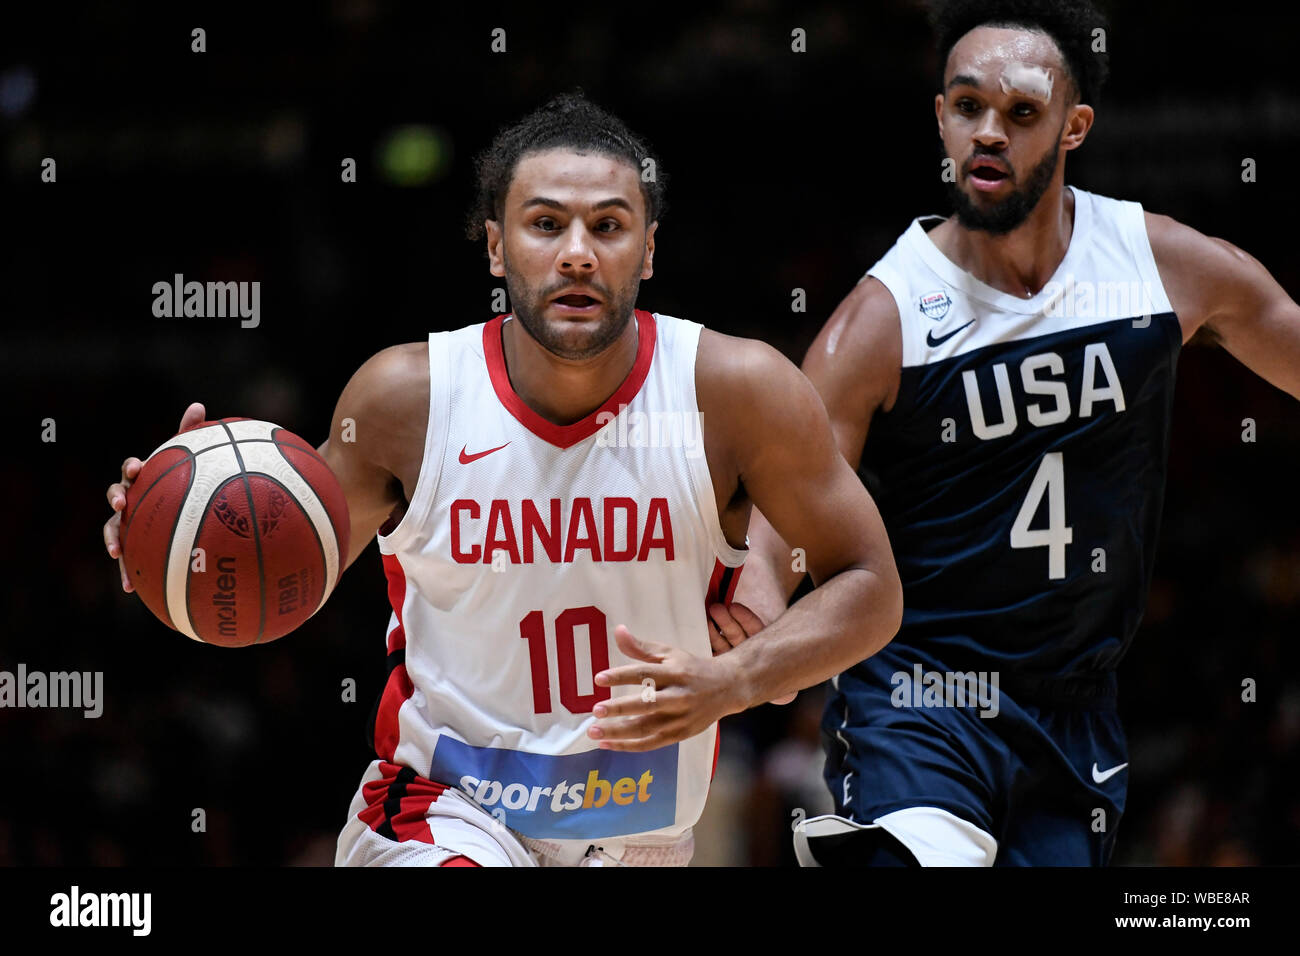 Sydney, Australia. 26th Aug, 2019. International Basketball, United Sates  of America Basketball versus Canada Basketball; Kaza Kajami-Keane of Canada  is followed closely by Derrick White of USA - Editorial Use Only. Credit: